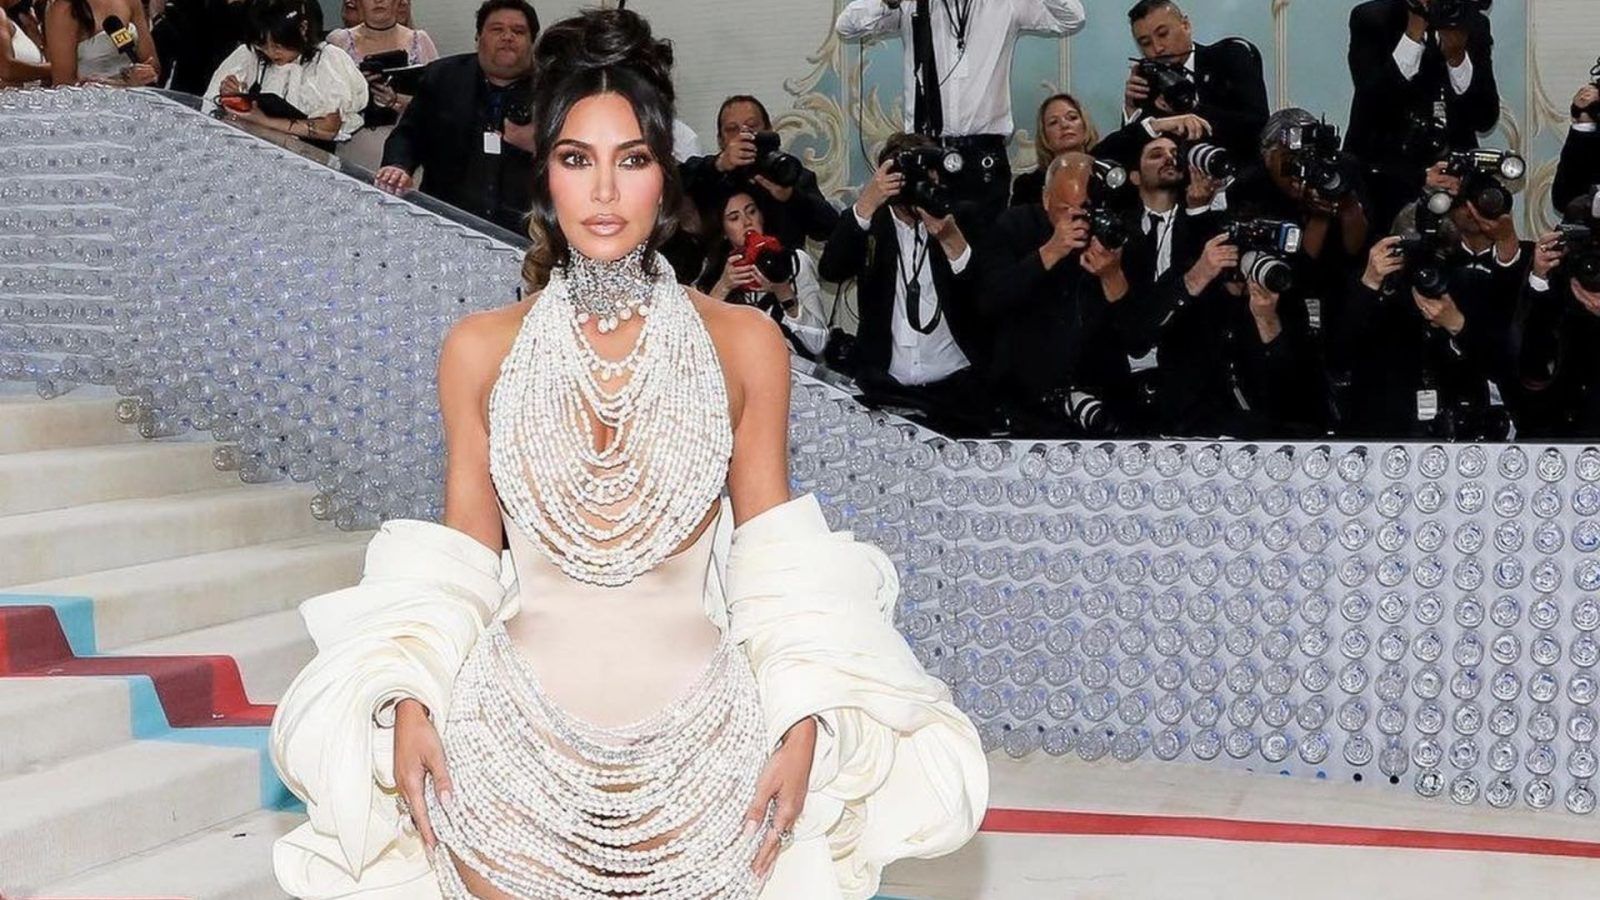 The most expensive jewellery owned by Kim Kardashian